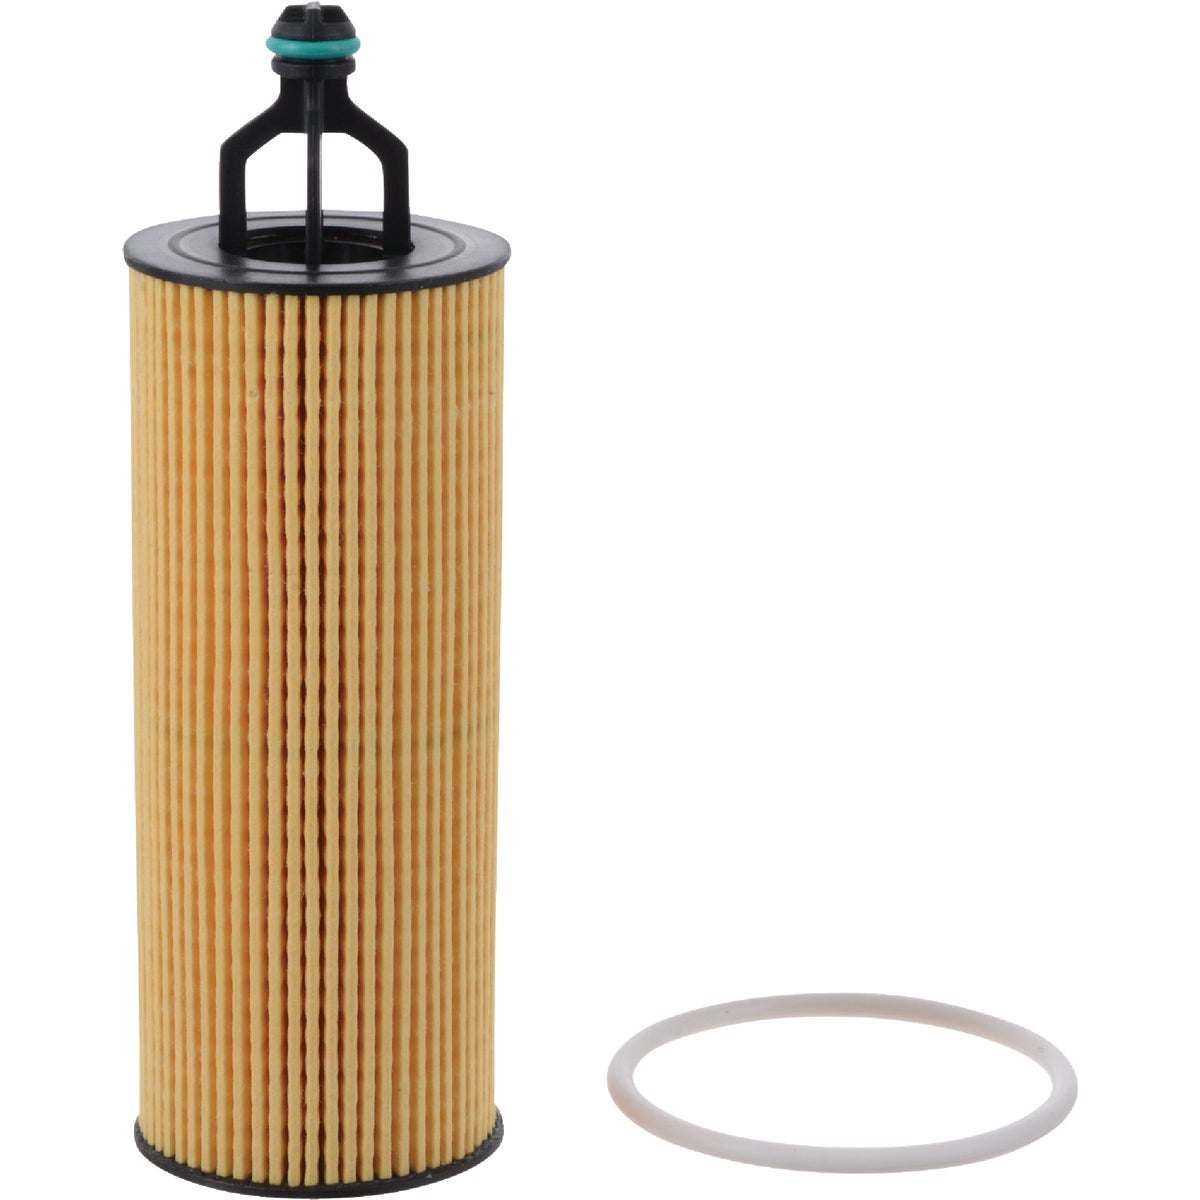 Item 570564, FRAM Extra Guard all-purpose oil filter designed for use with conventional 